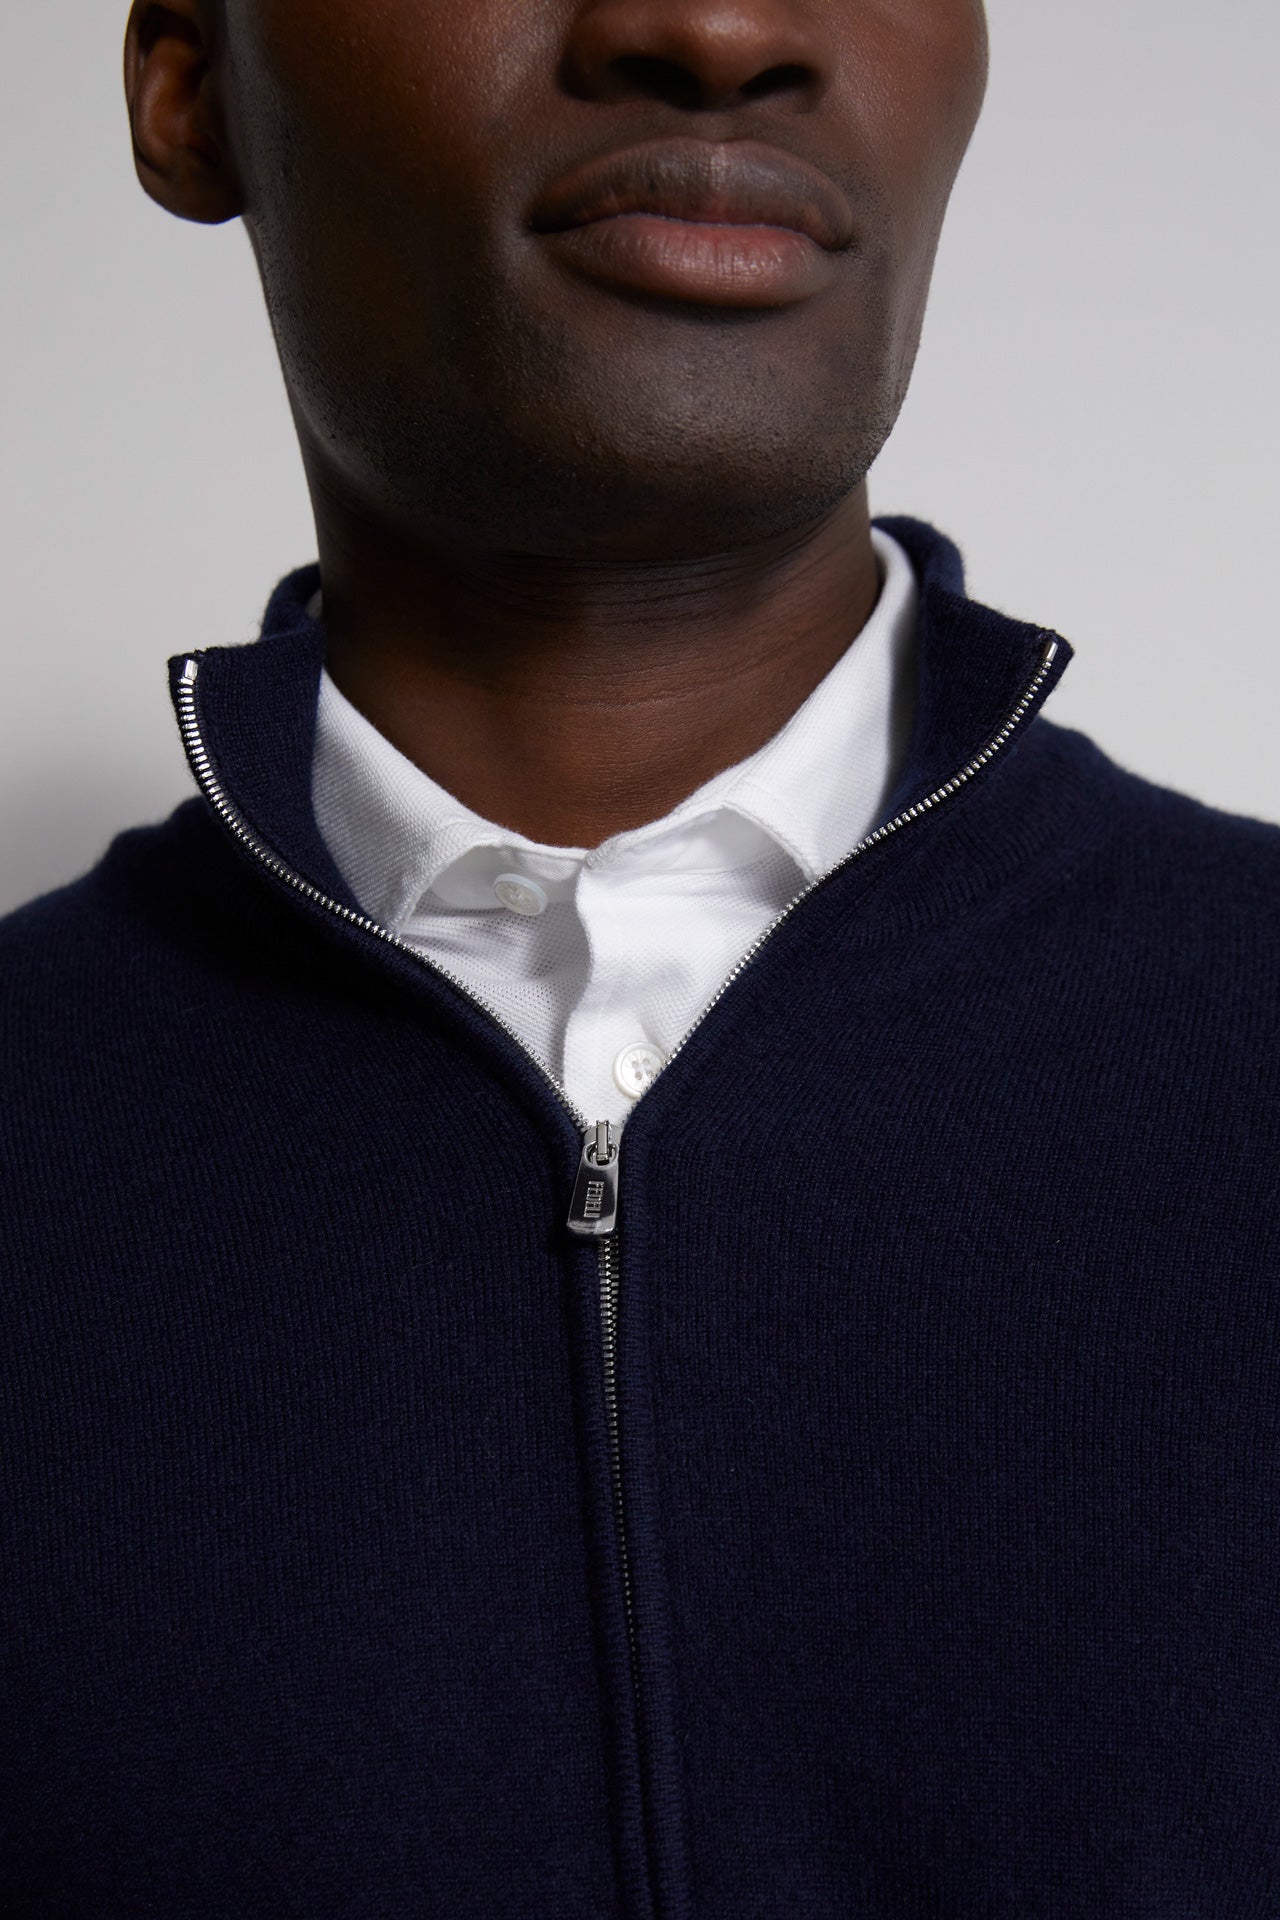 Favonio Open full-zipped cashmere sweater in iconic colors